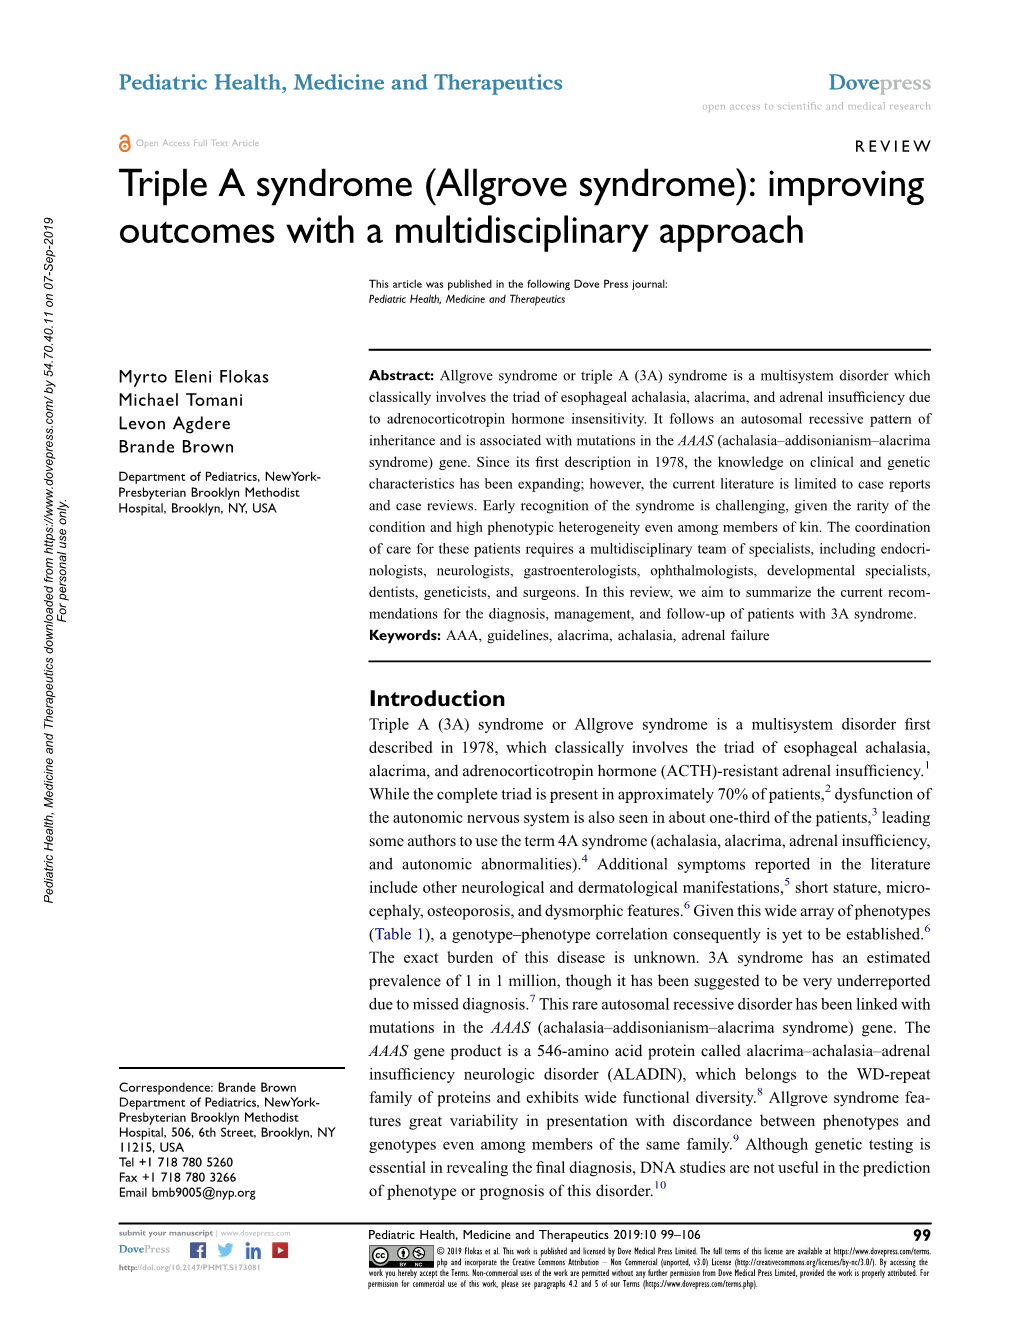 Allgrove Syndrome): Improving Outcomes with a Multidisciplinary Approach